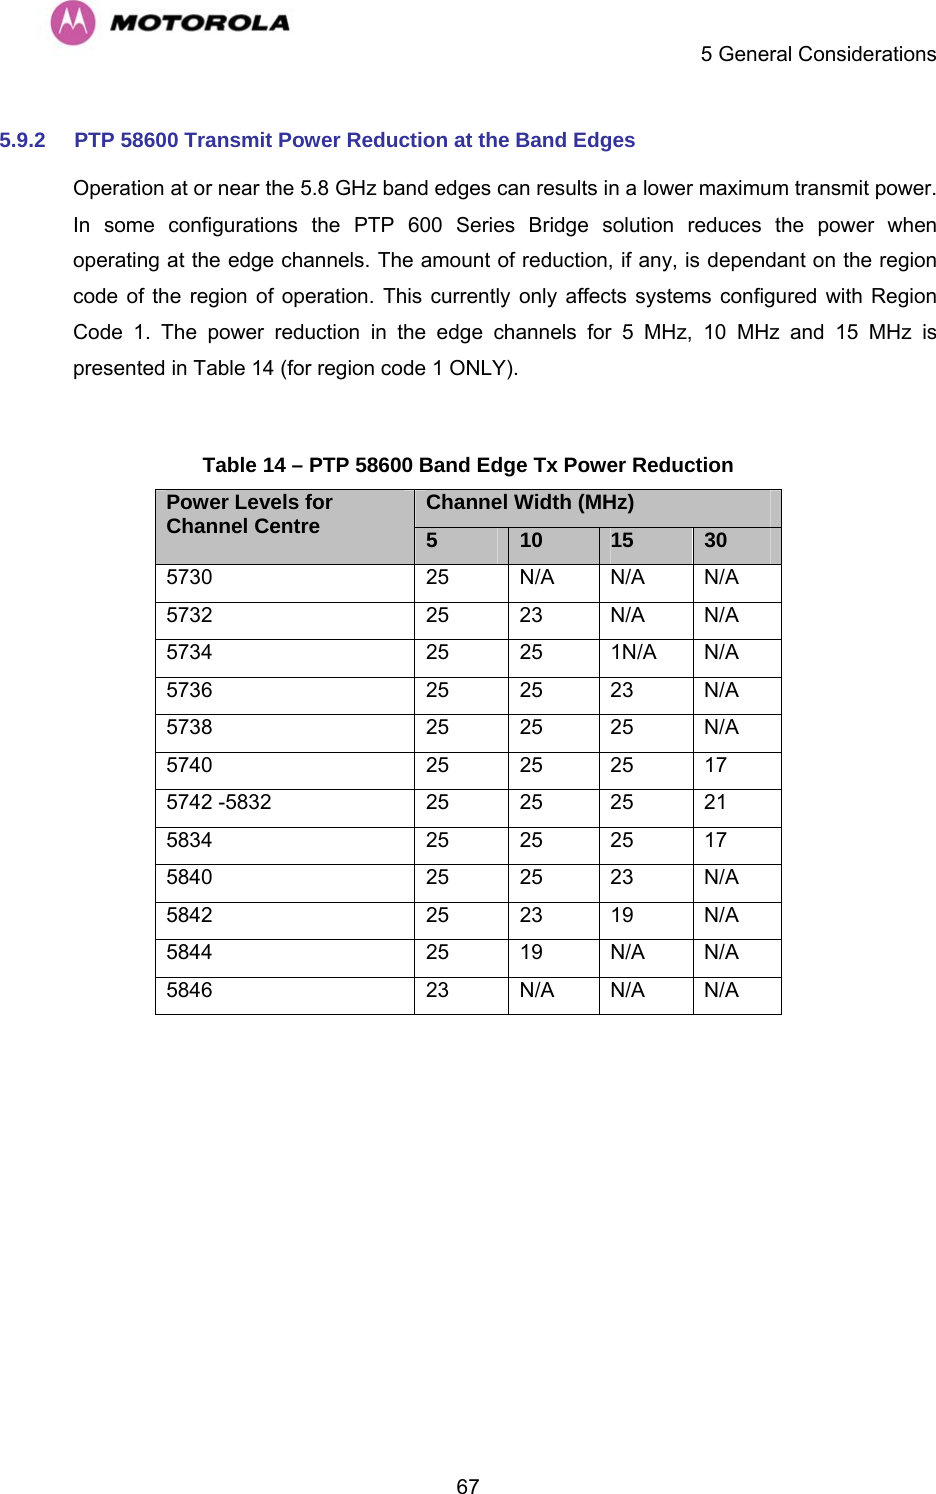    5 General Considerations  675.9.2  PTP 58600 Transmit Power Reduction at the Band Edges Operation at or near the 5.8 GHz band edges can results in a lower maximum transmit power. In some configurations the PTP 600 Series Bridge solution reduces the power when operating at the edge channels. The amount of reduction, if any, is dependant on the region code of the region of operation. This currently only affects systems configured with Region Code 1. The power reduction in the edge channels for 5 MHz, 10 MHz and 15 MHz is presented in Table 14 (for region code 1 ONLY).  Table 14 – PTP 58600 Band Edge Tx Power Reduction Channel Width (MHz) Power Levels for Channel Centre  5   10   15   30  5730  25   N/A   N/A   N/A  5732  25   23   N/A   N/A  5734  25   25   1N/A   N/A  5736  25   25   23   N/A  5738  25   25   25   N/A  5740  25   25   25   17  5742 -5832  25   25   25   21  5834  25   25   25   17  5840  25   25   23   N/A  5842  25   23   19   N/A  5844  25   19   N/A   N/A  5846  23   N/A   N/A   N/A  